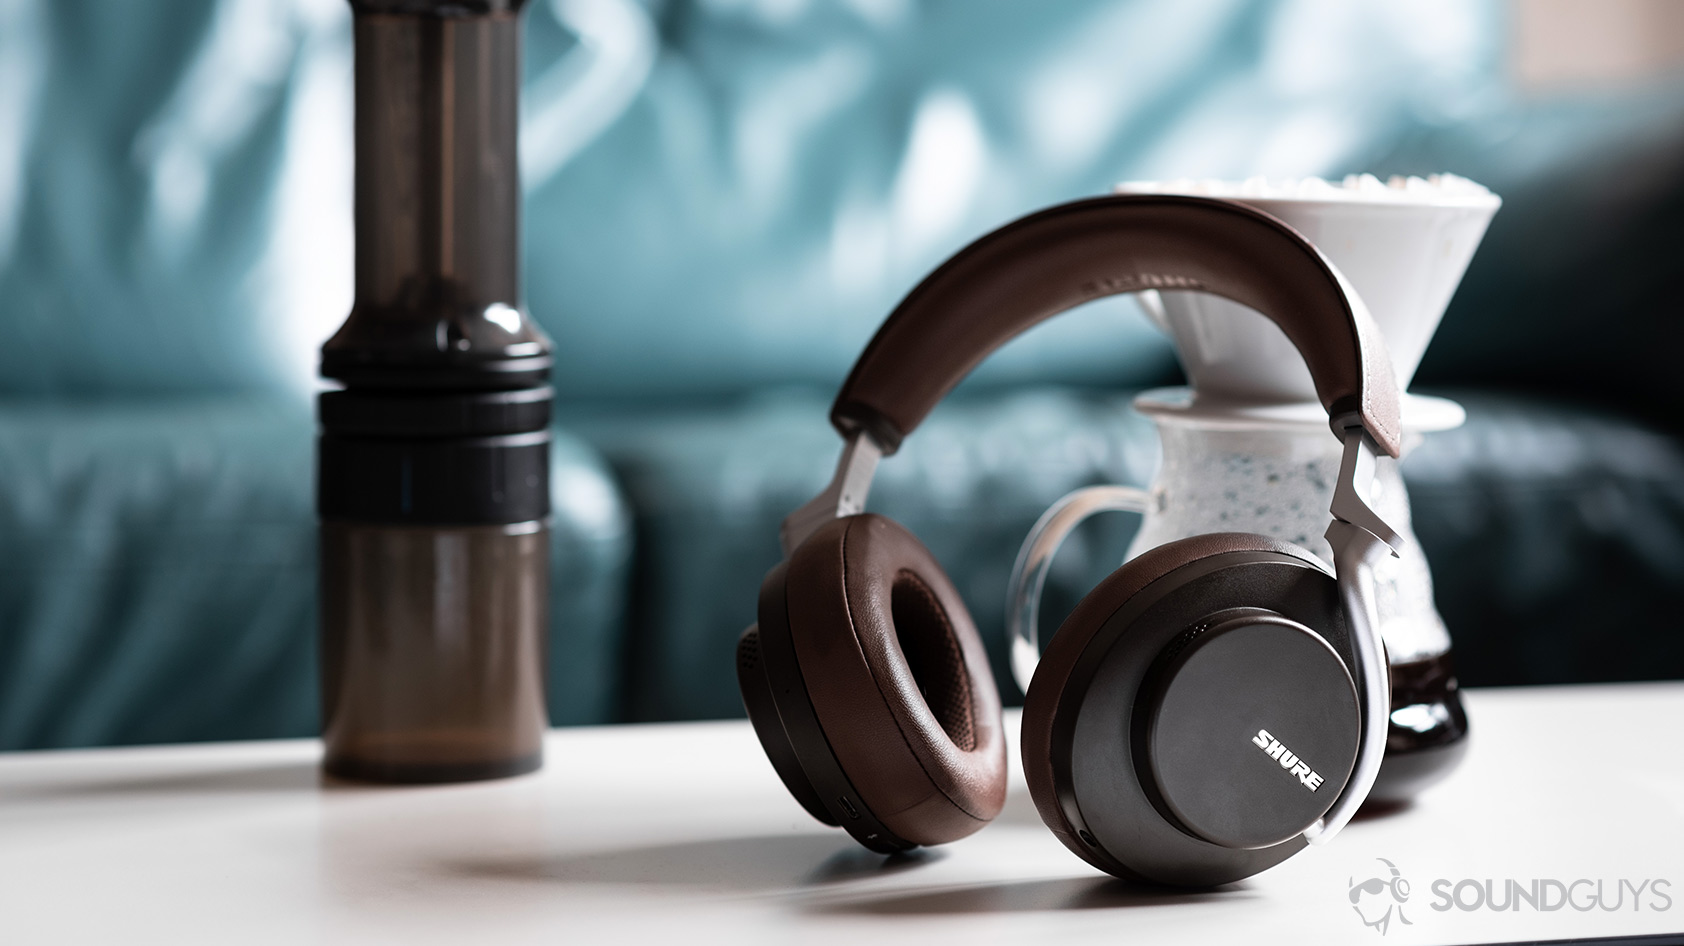 A picture of the Shure Aonic 50 noise canceling Bluetooth headphones in brown leaning against a coffee carafe.